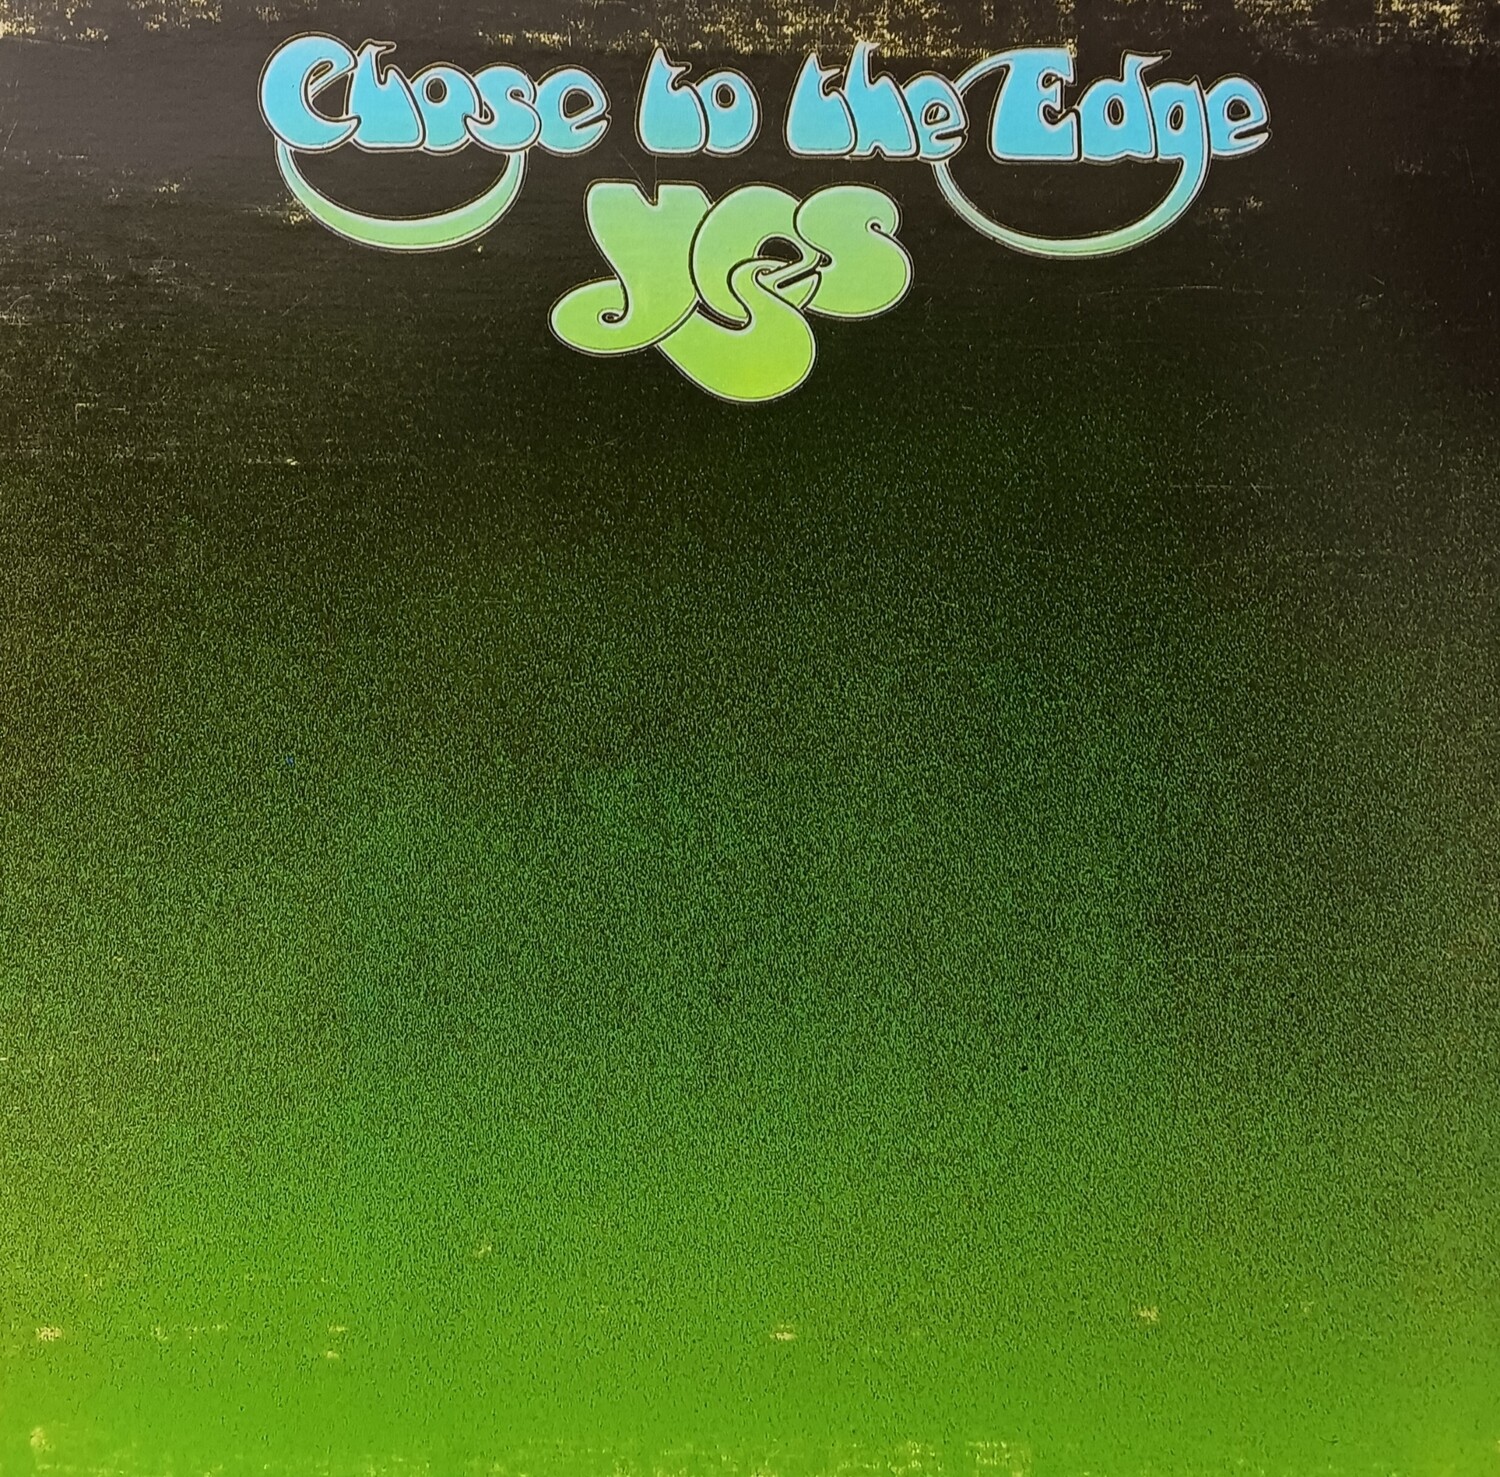 YES - Close to the edge